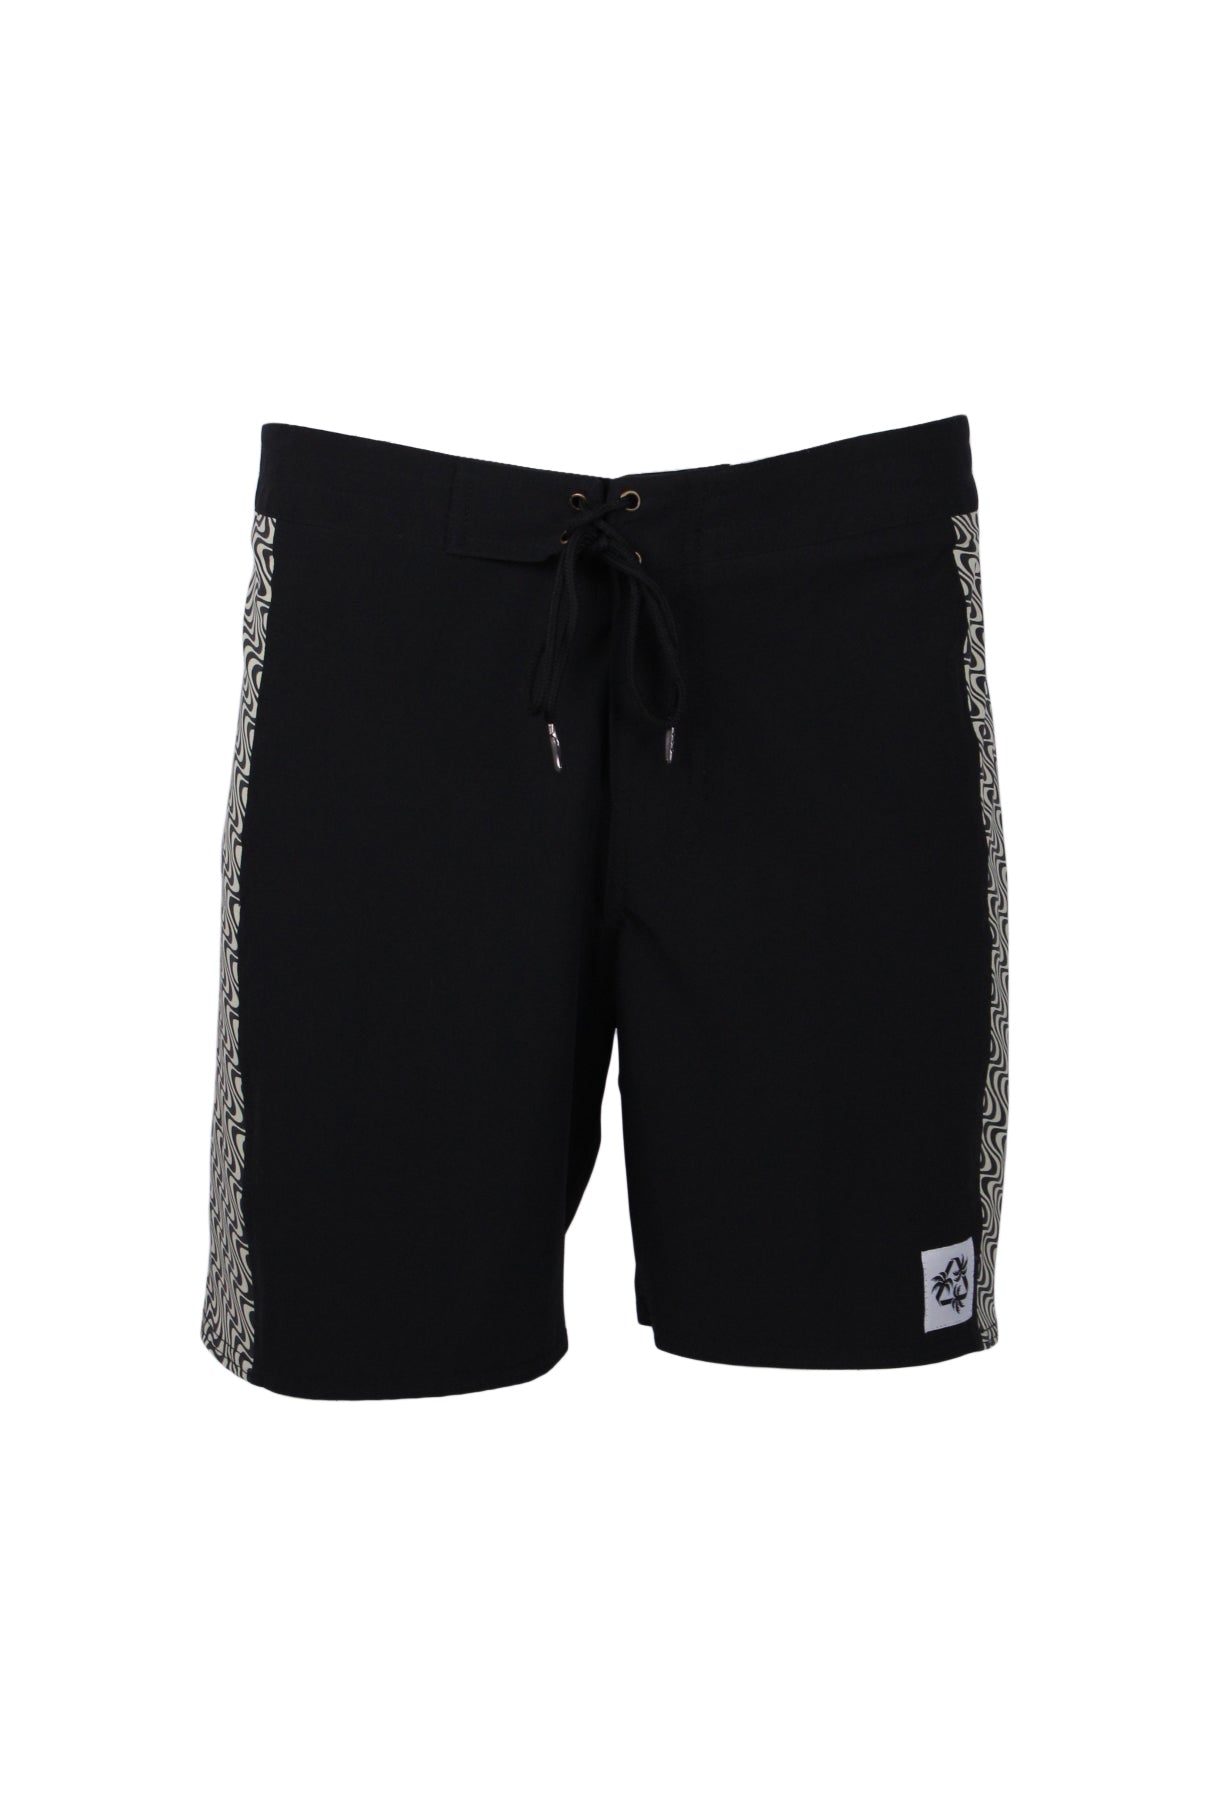 front of black board shorts displayed on half mannequin. lace up front closure. partial view of abstract patterned side panels.  